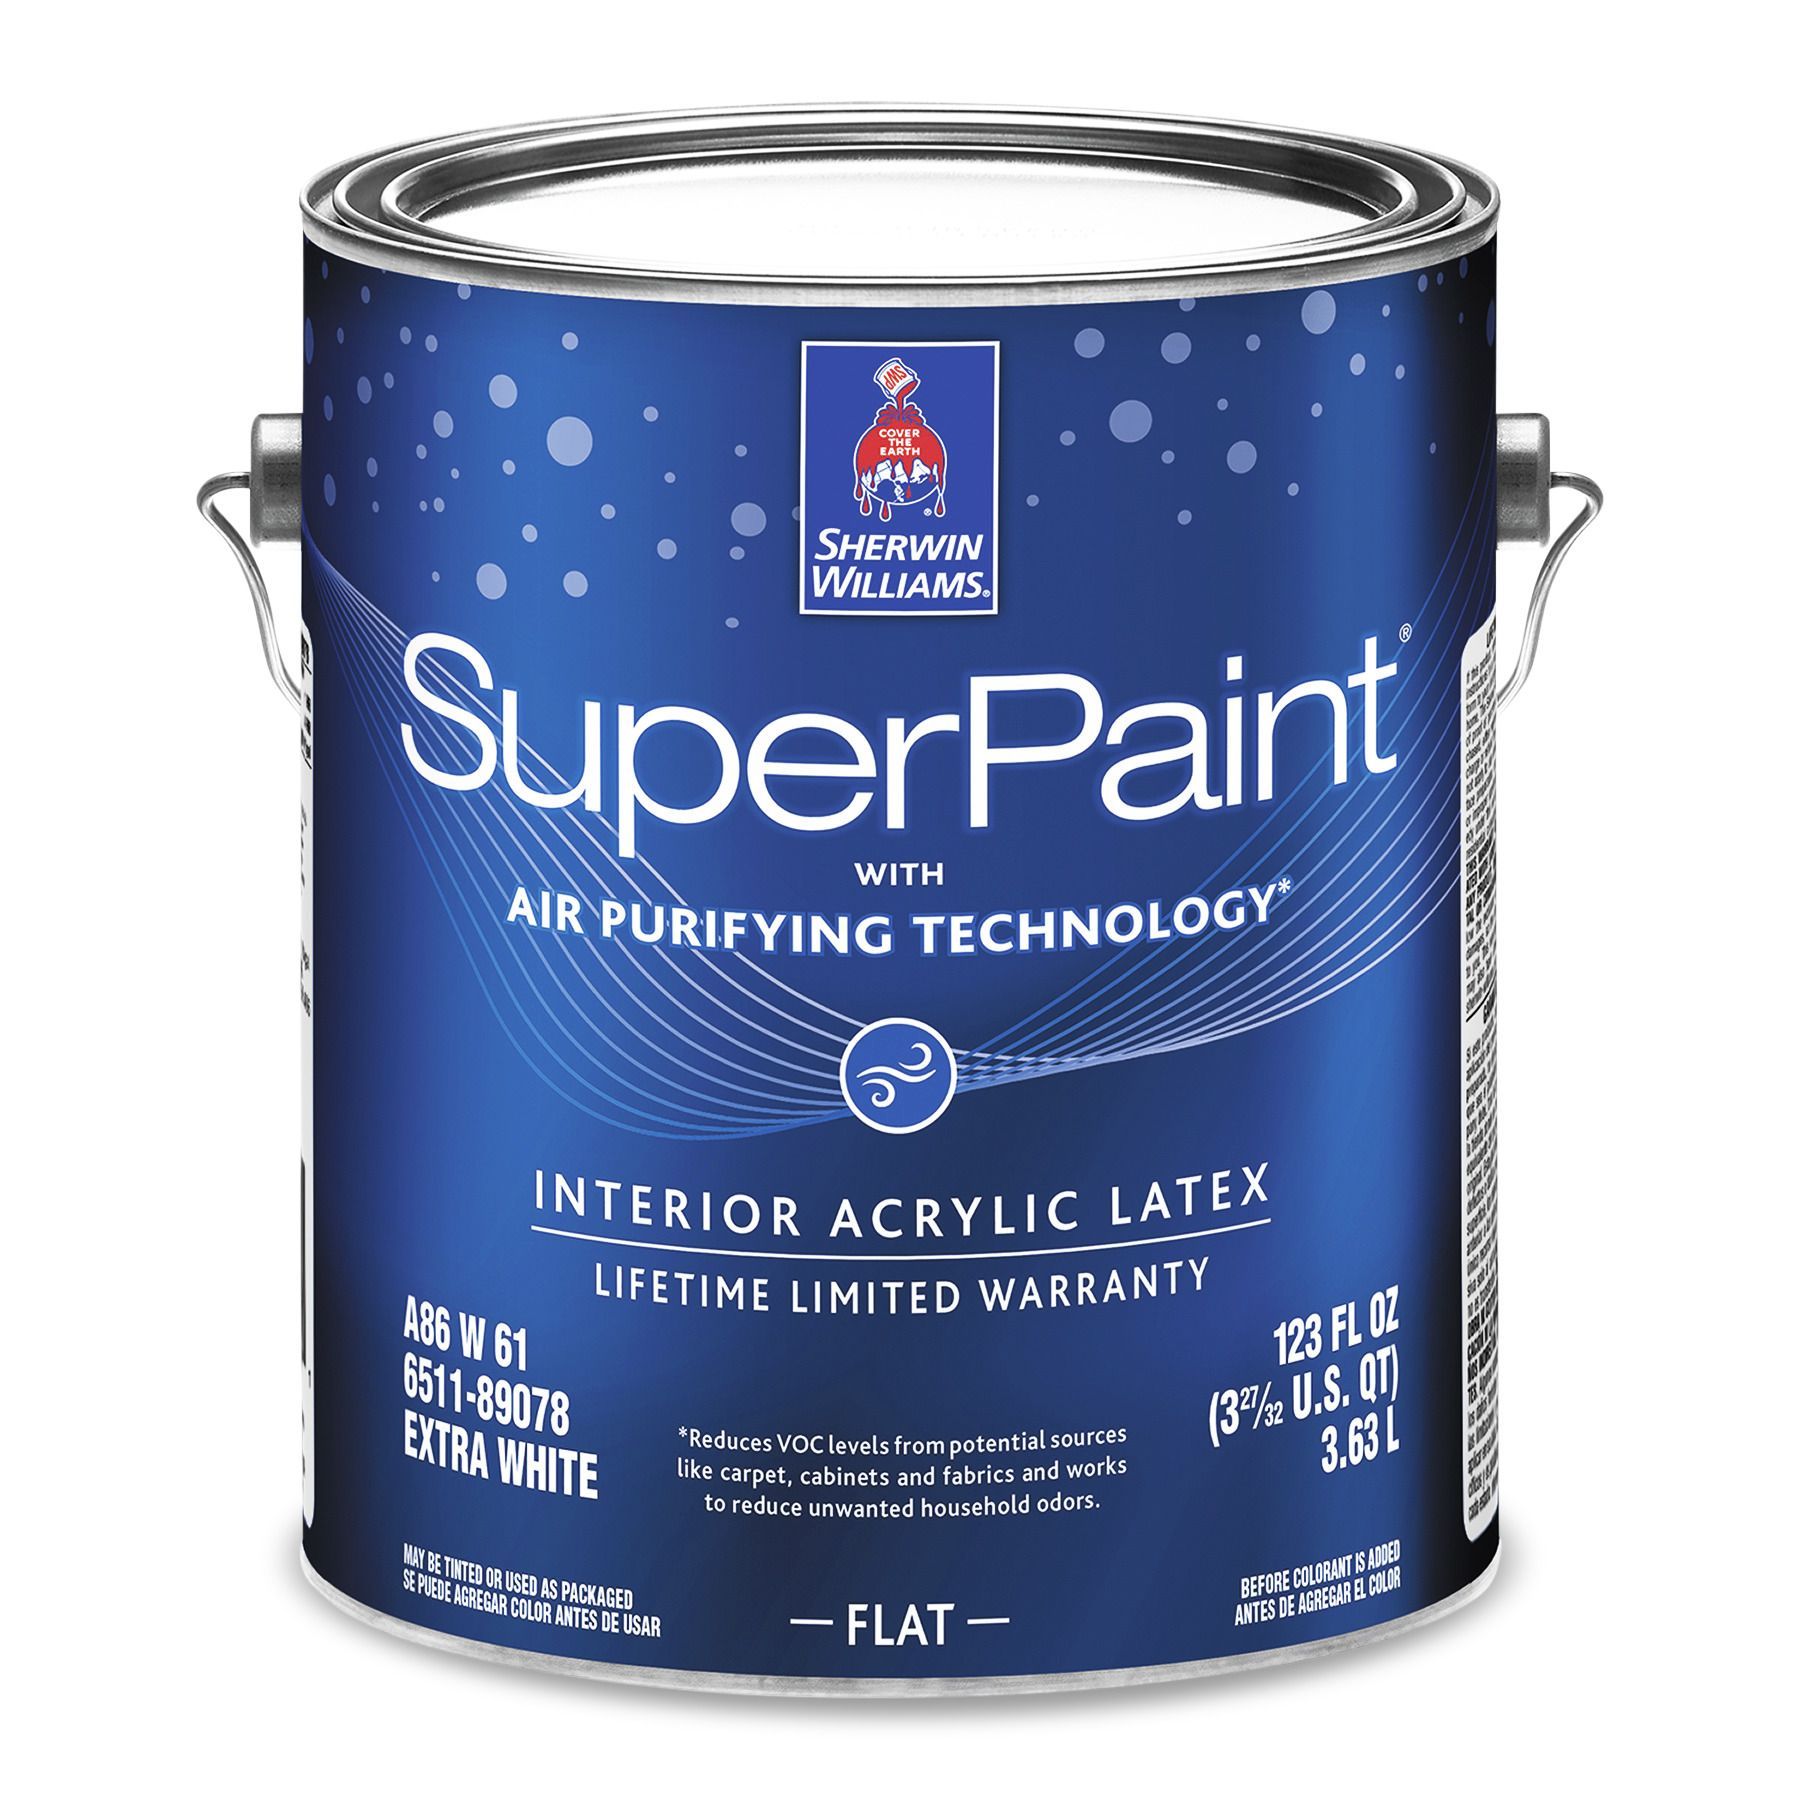 SuperPaint Interior Acrylic with Air Purifying Technology